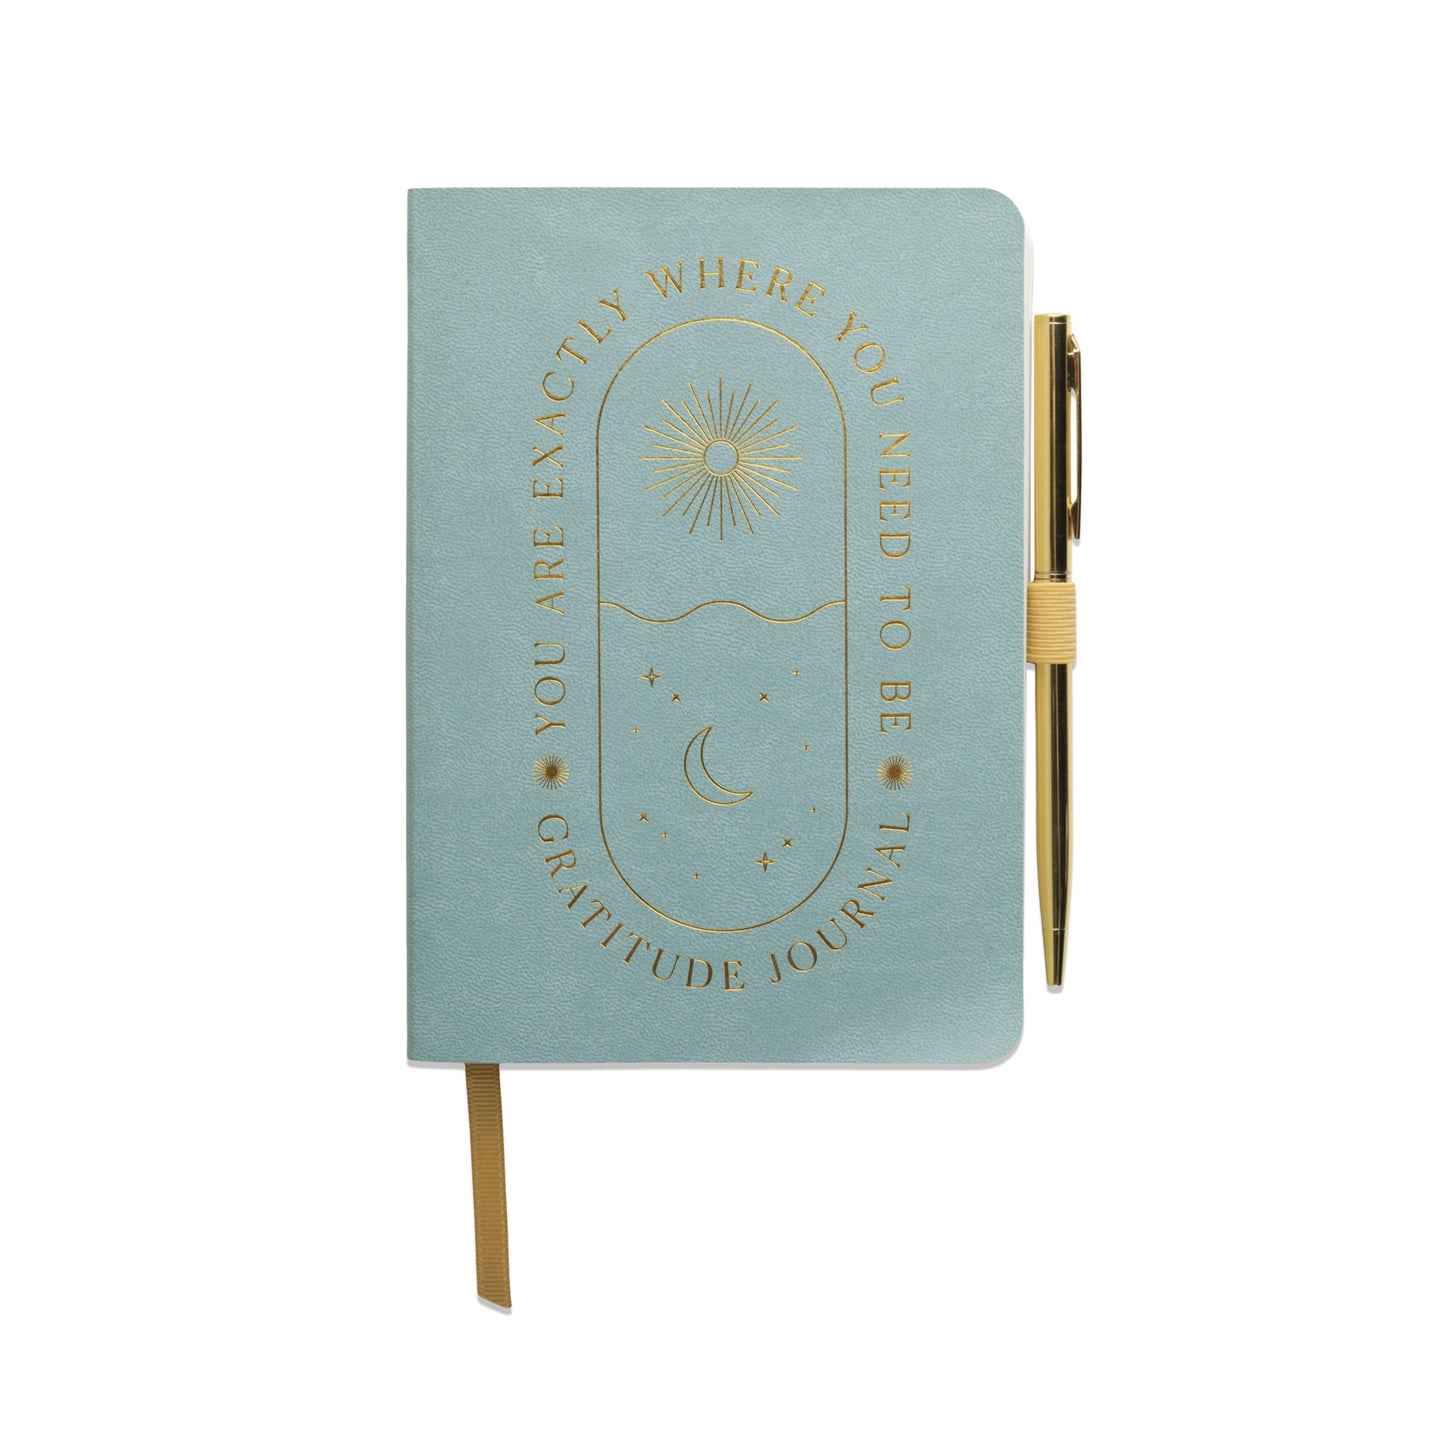 Gratitude Journal - You Are Exactly Where You Need To Be light blue with ribbon marker and pen